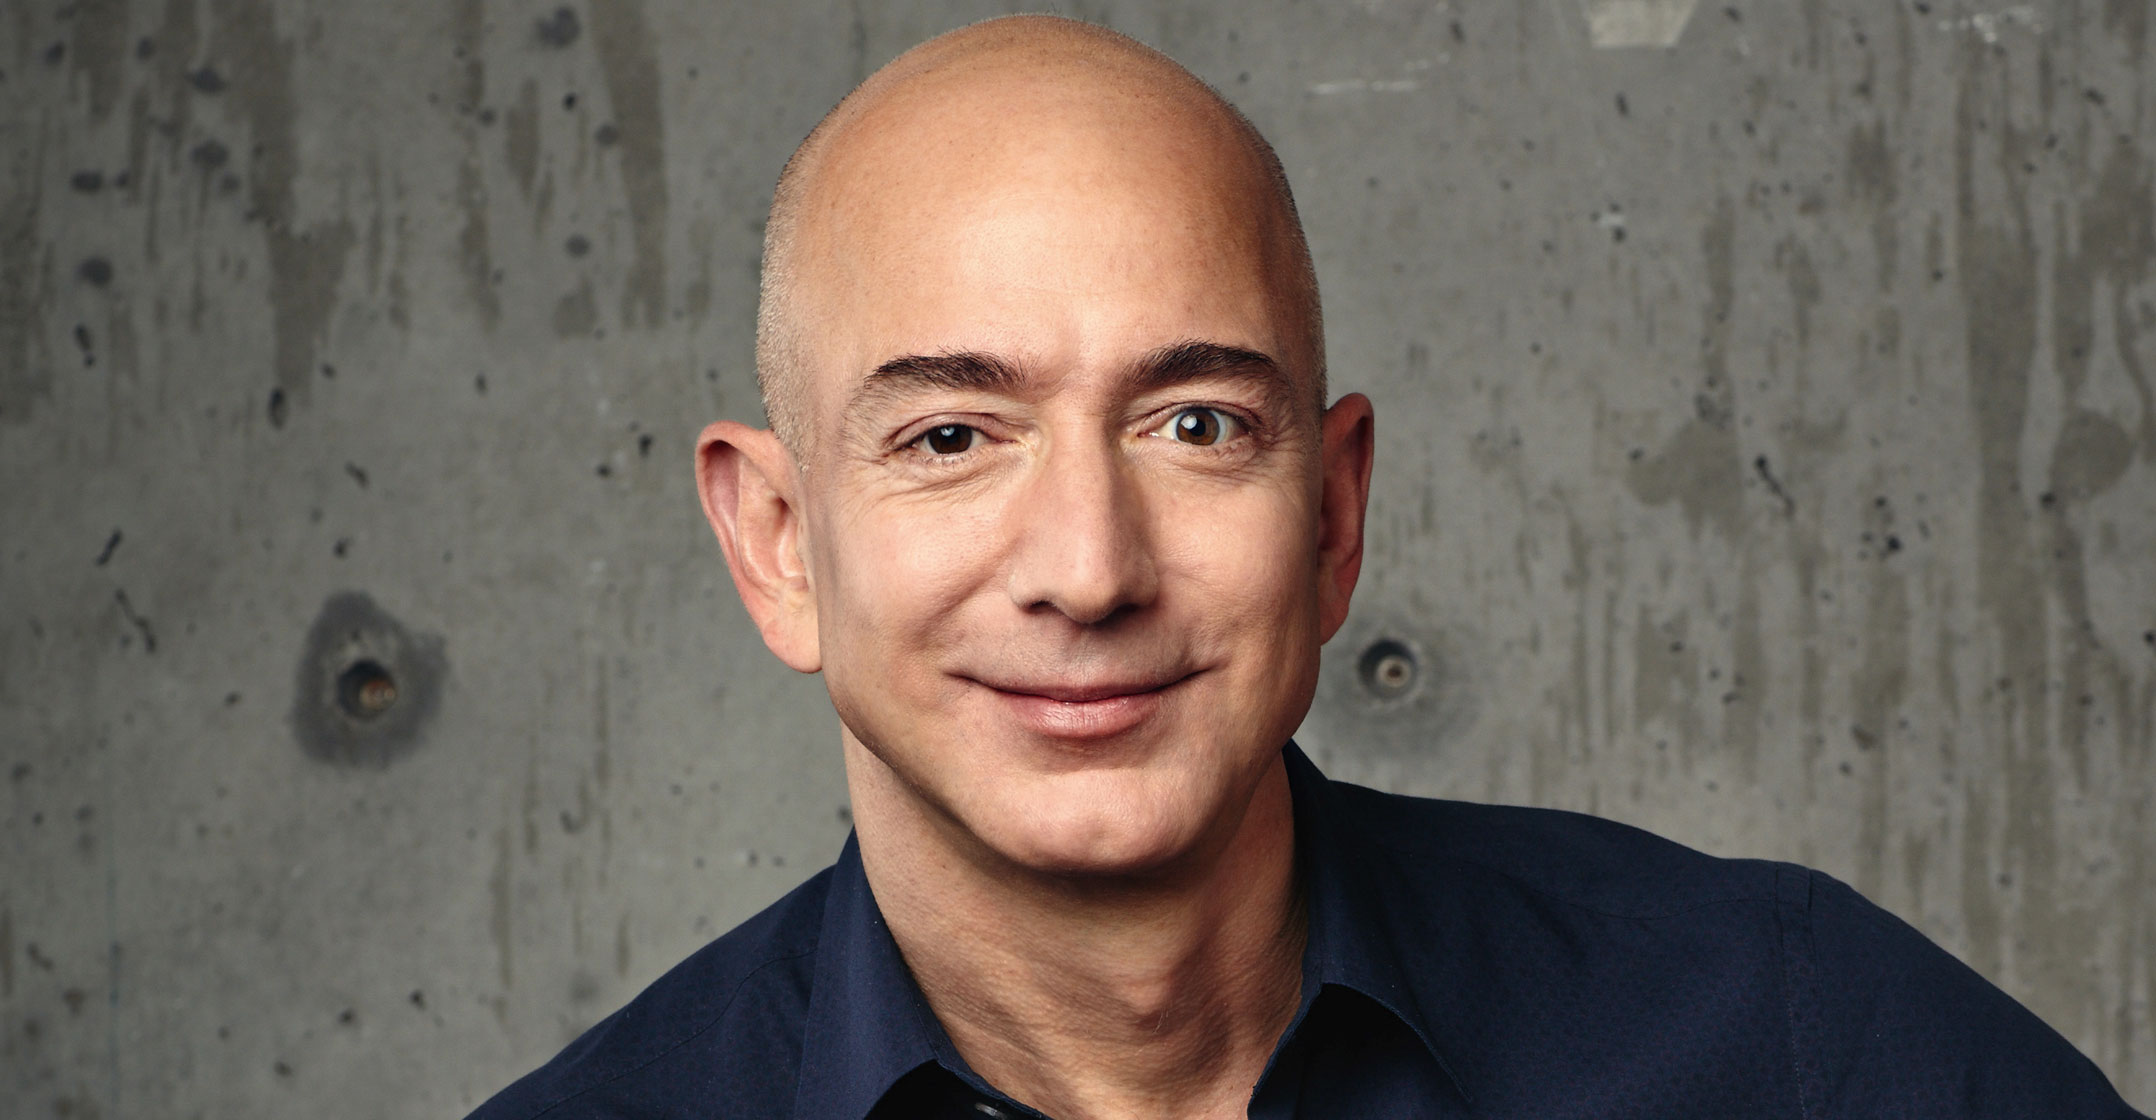 Bezos topples Gates as world's richest person TechCentral